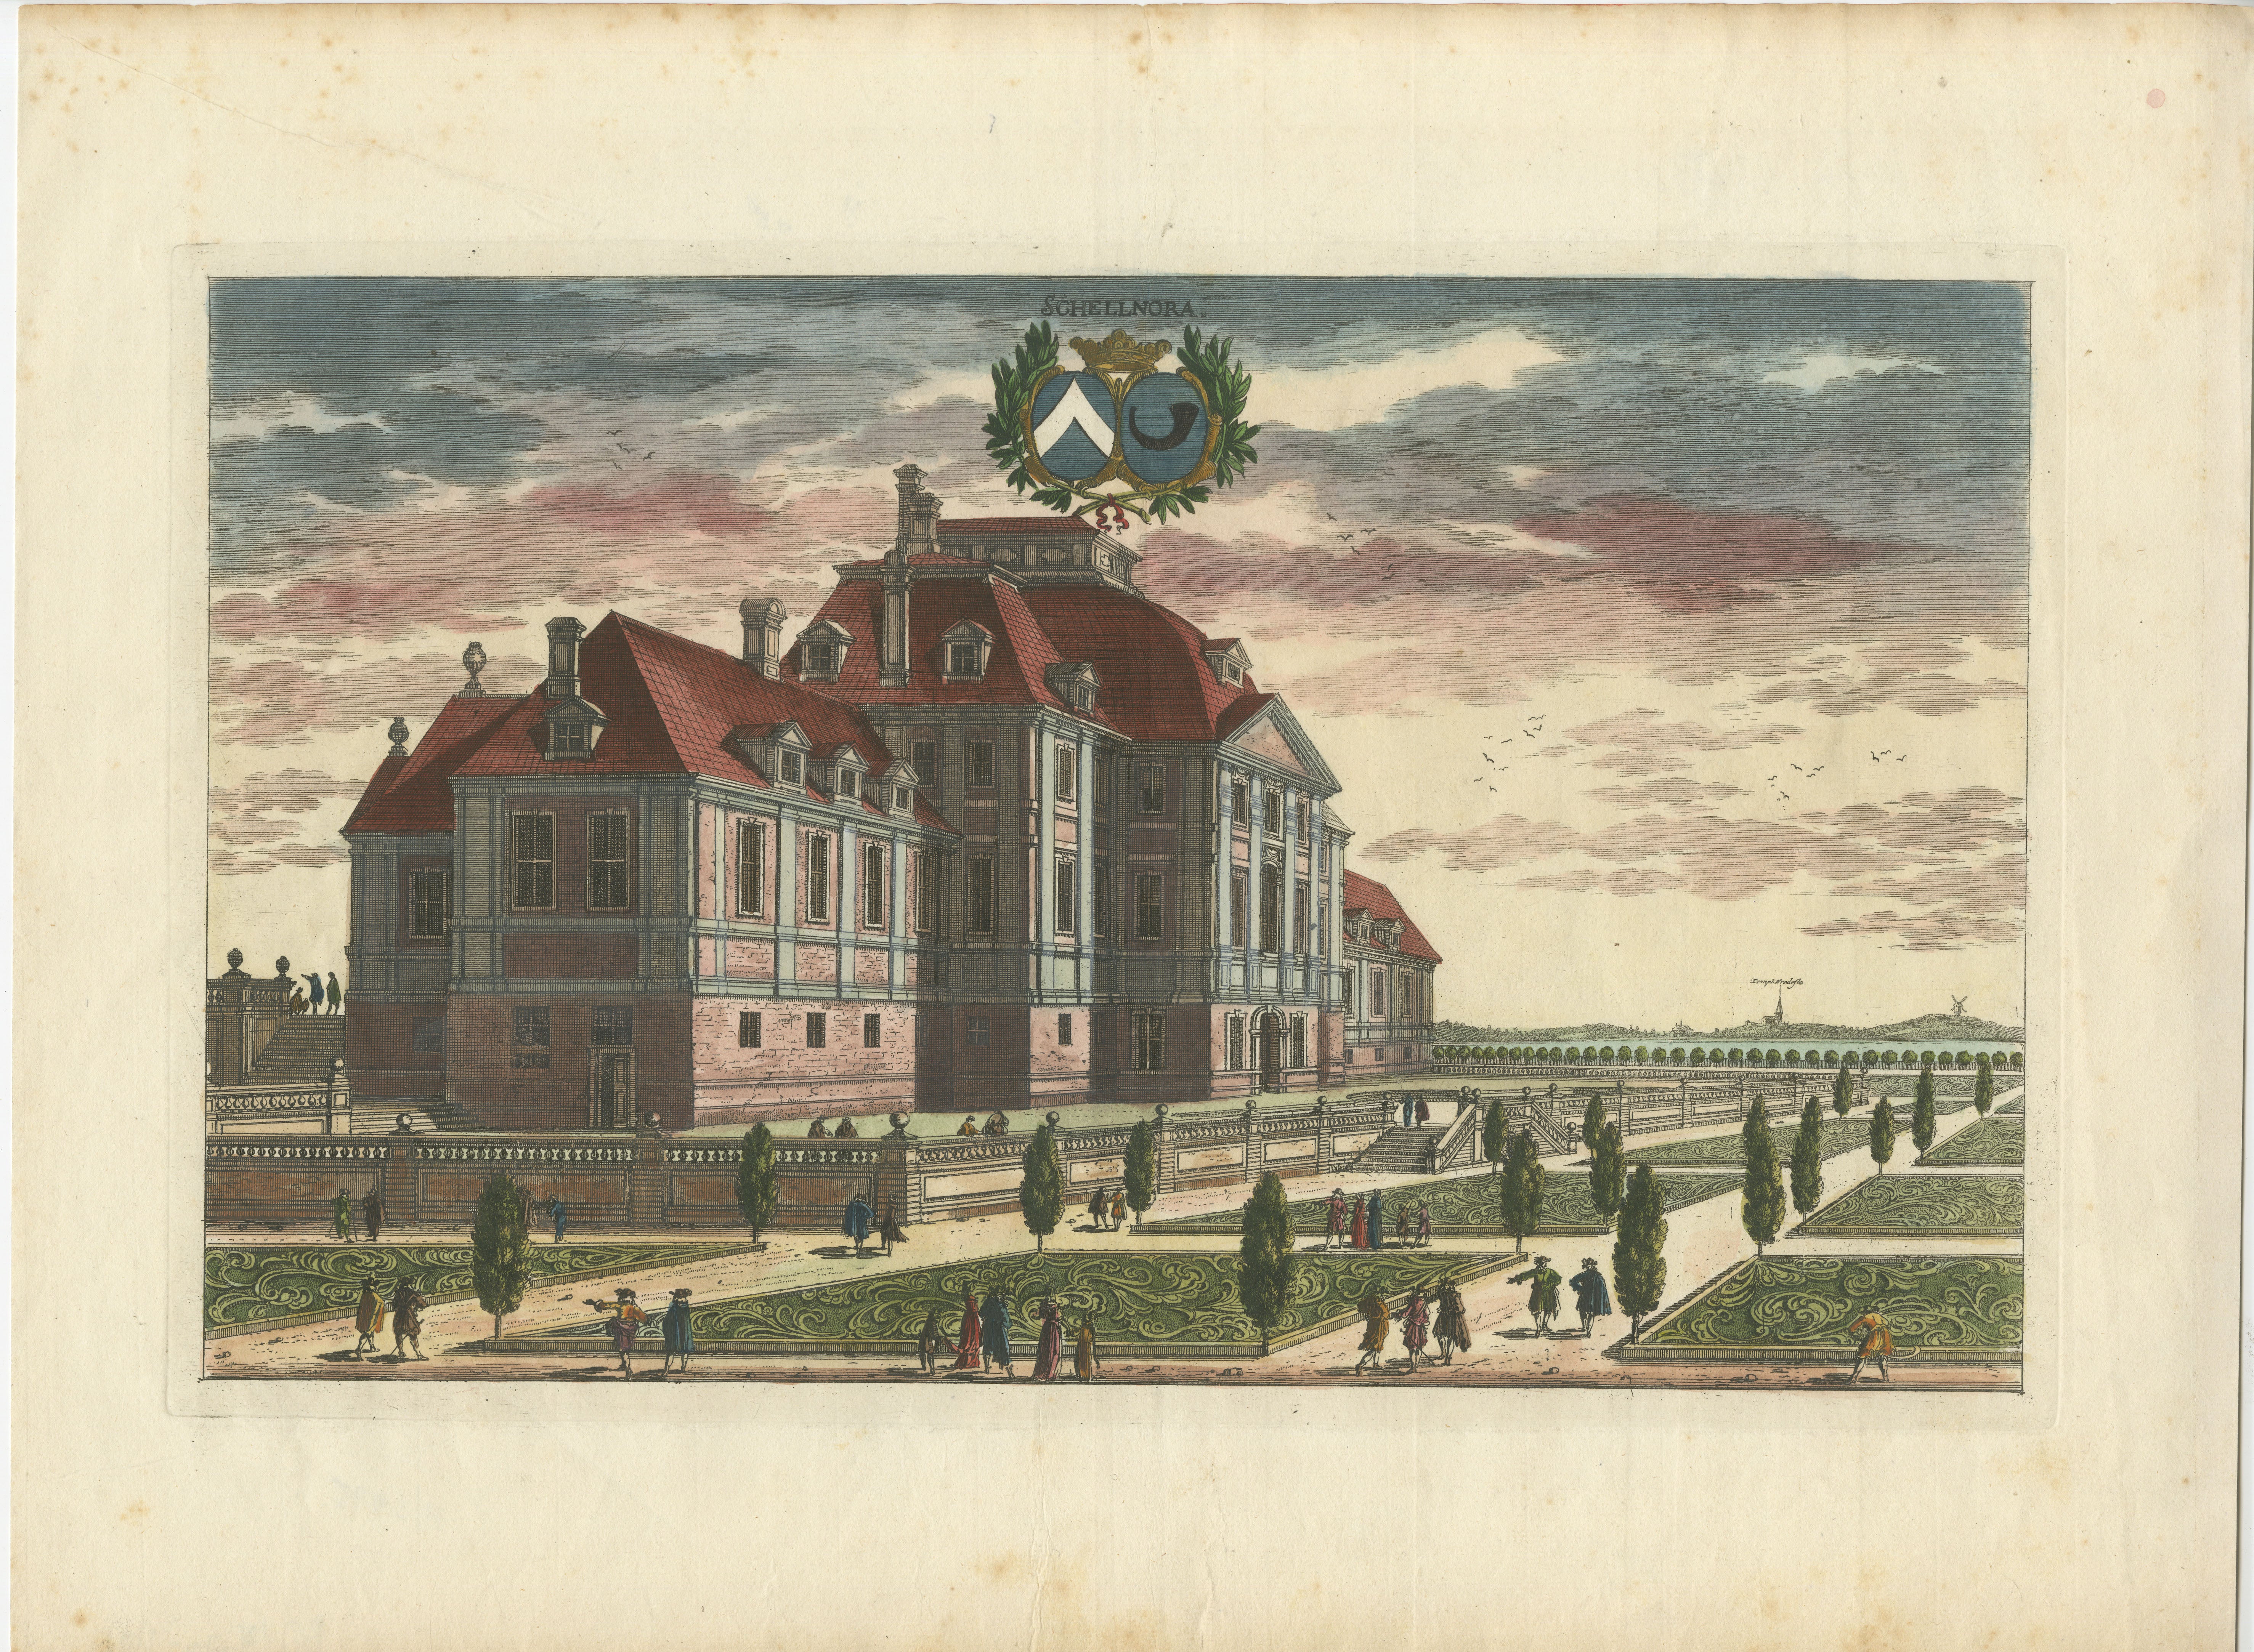 This is an antique hand-colored print depicting the manor known as Schelenora, showing the building's facade and garden. The engraving is part of the collection 